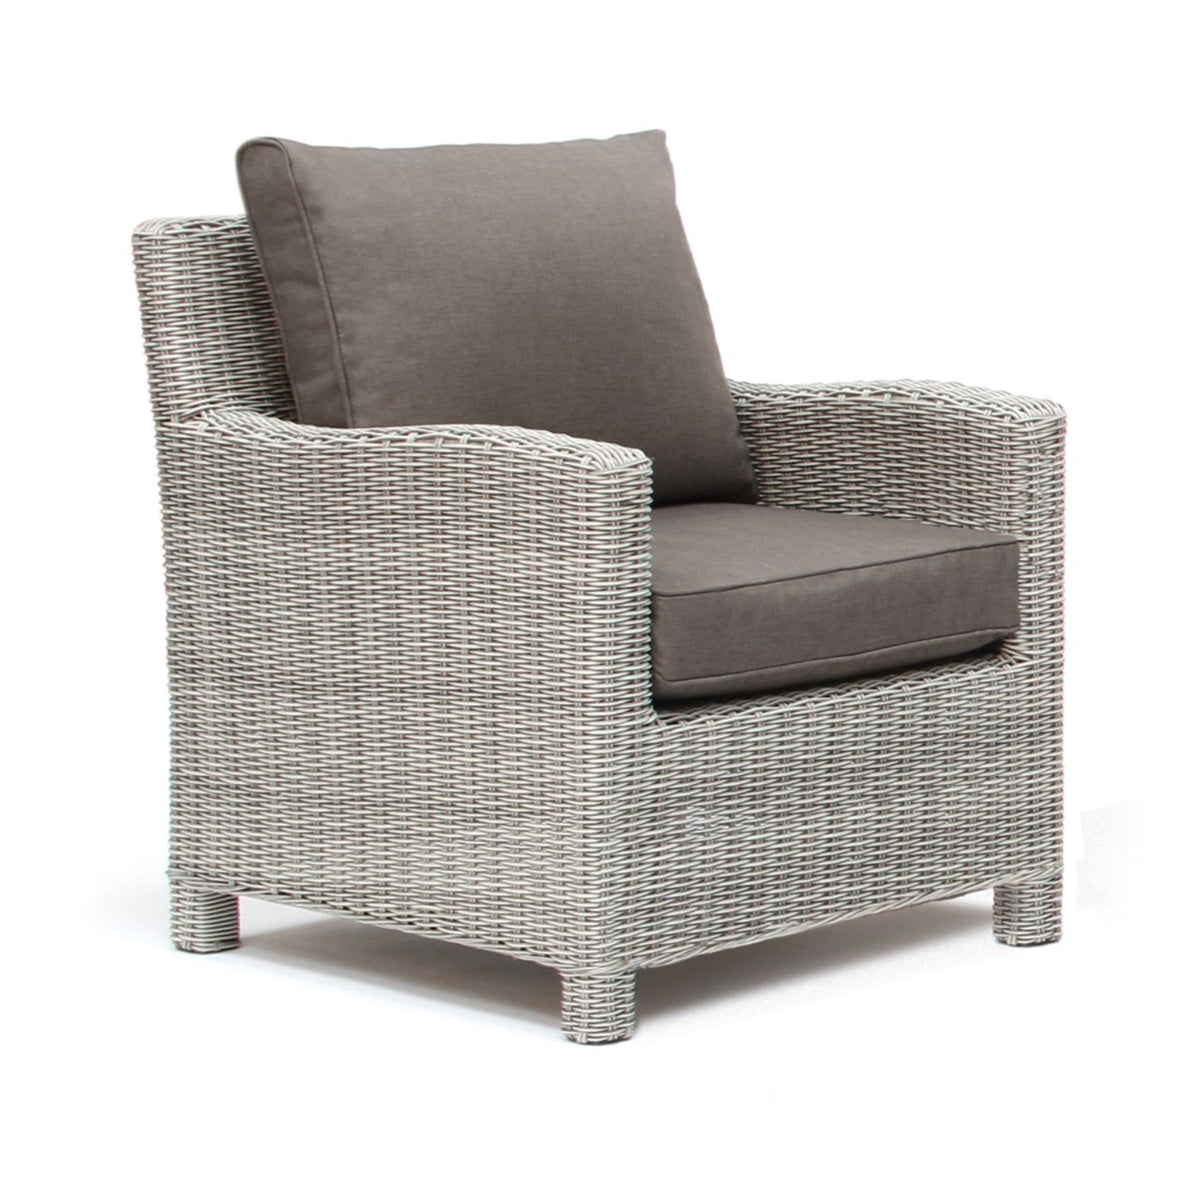 Kettler Palma Casual Dining Armchair with Cushion - White Wash